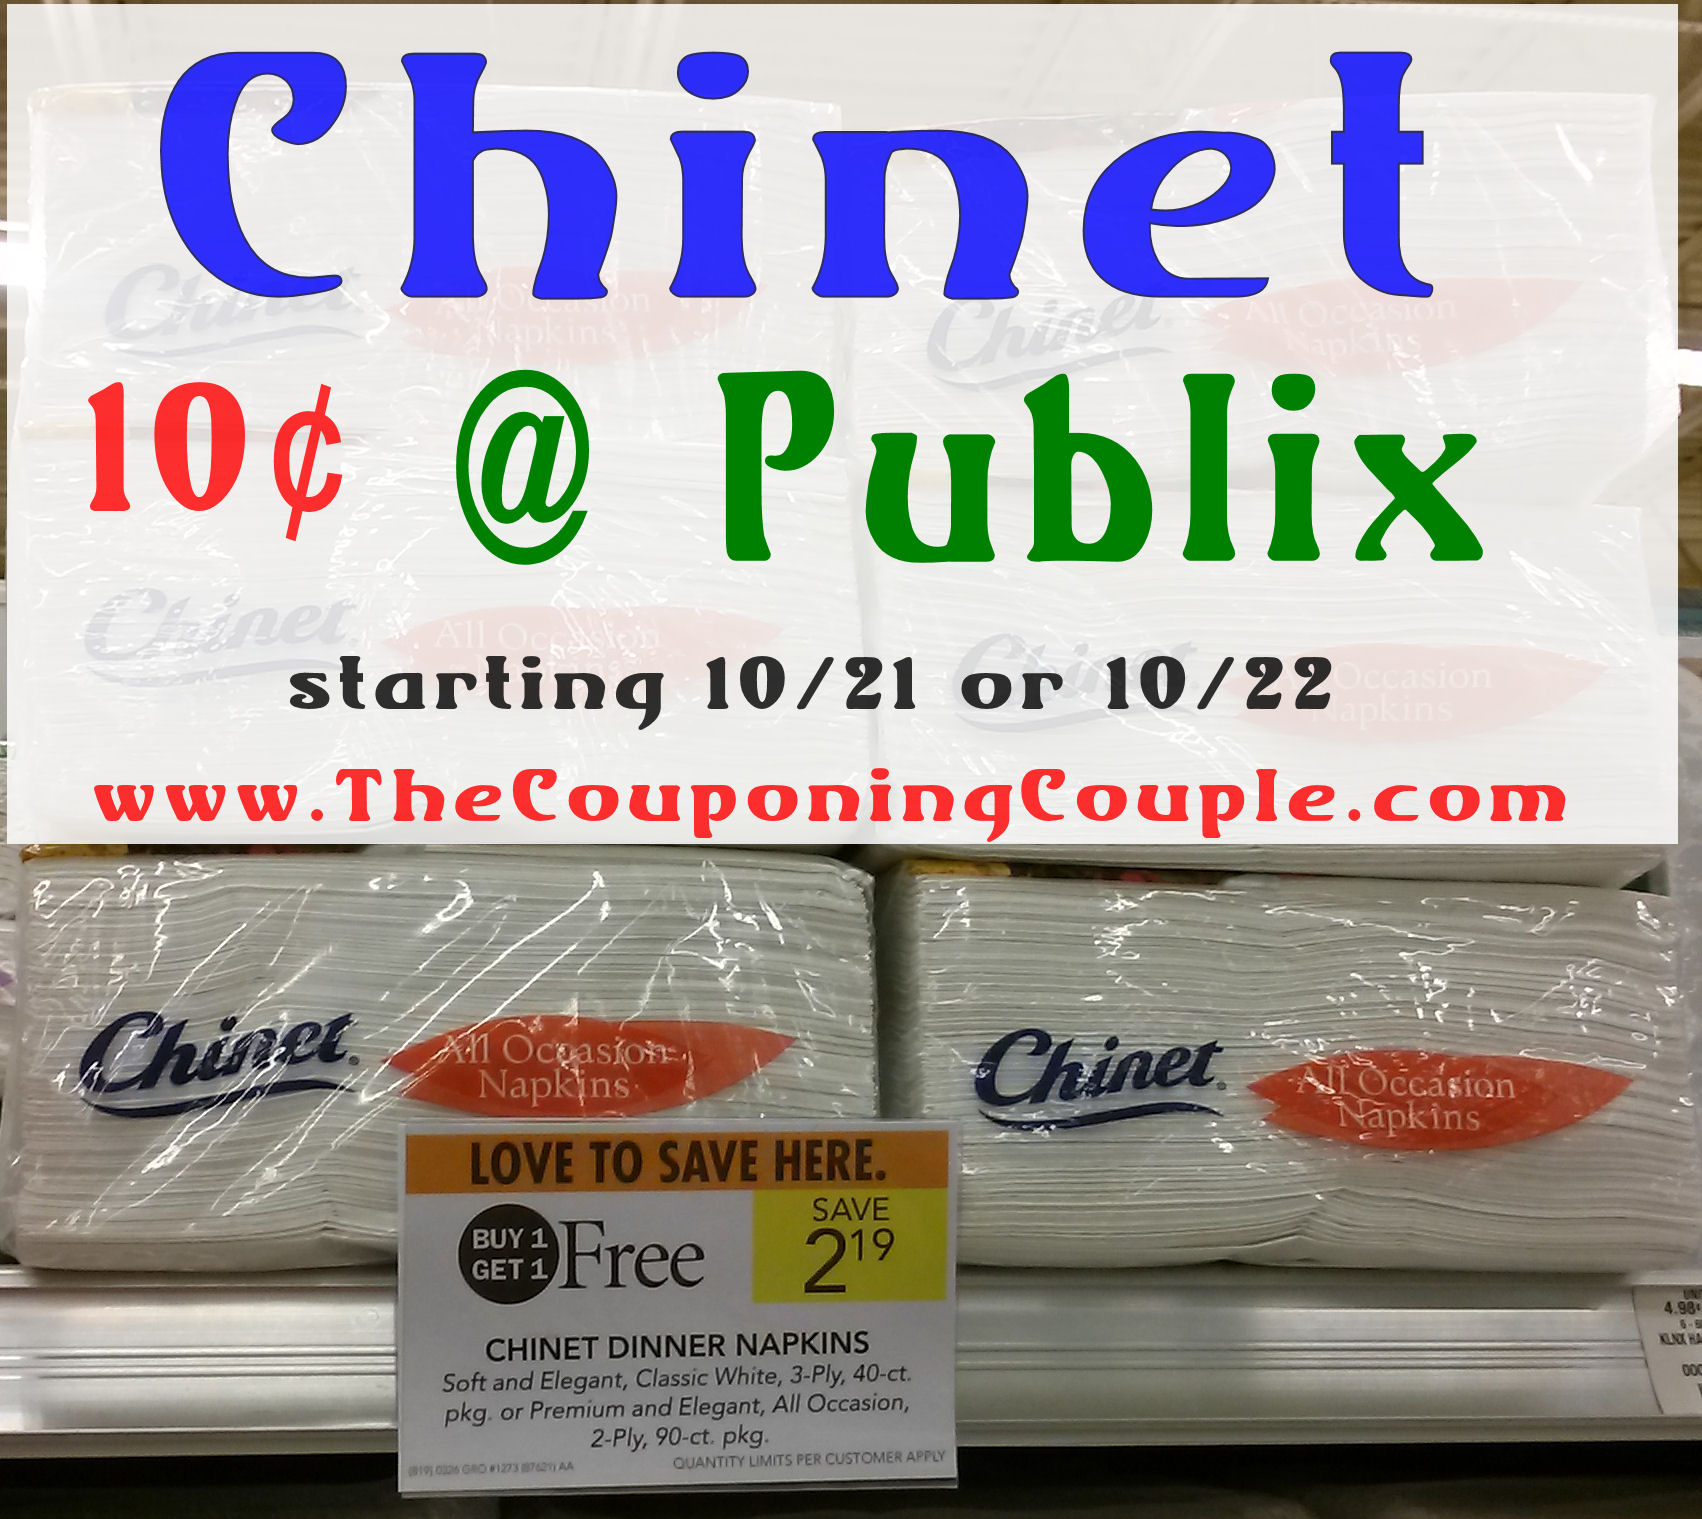 Hot Deal On Chinet Napkins At Publix Starting 10/22 - Free Printable Chinet Coupons